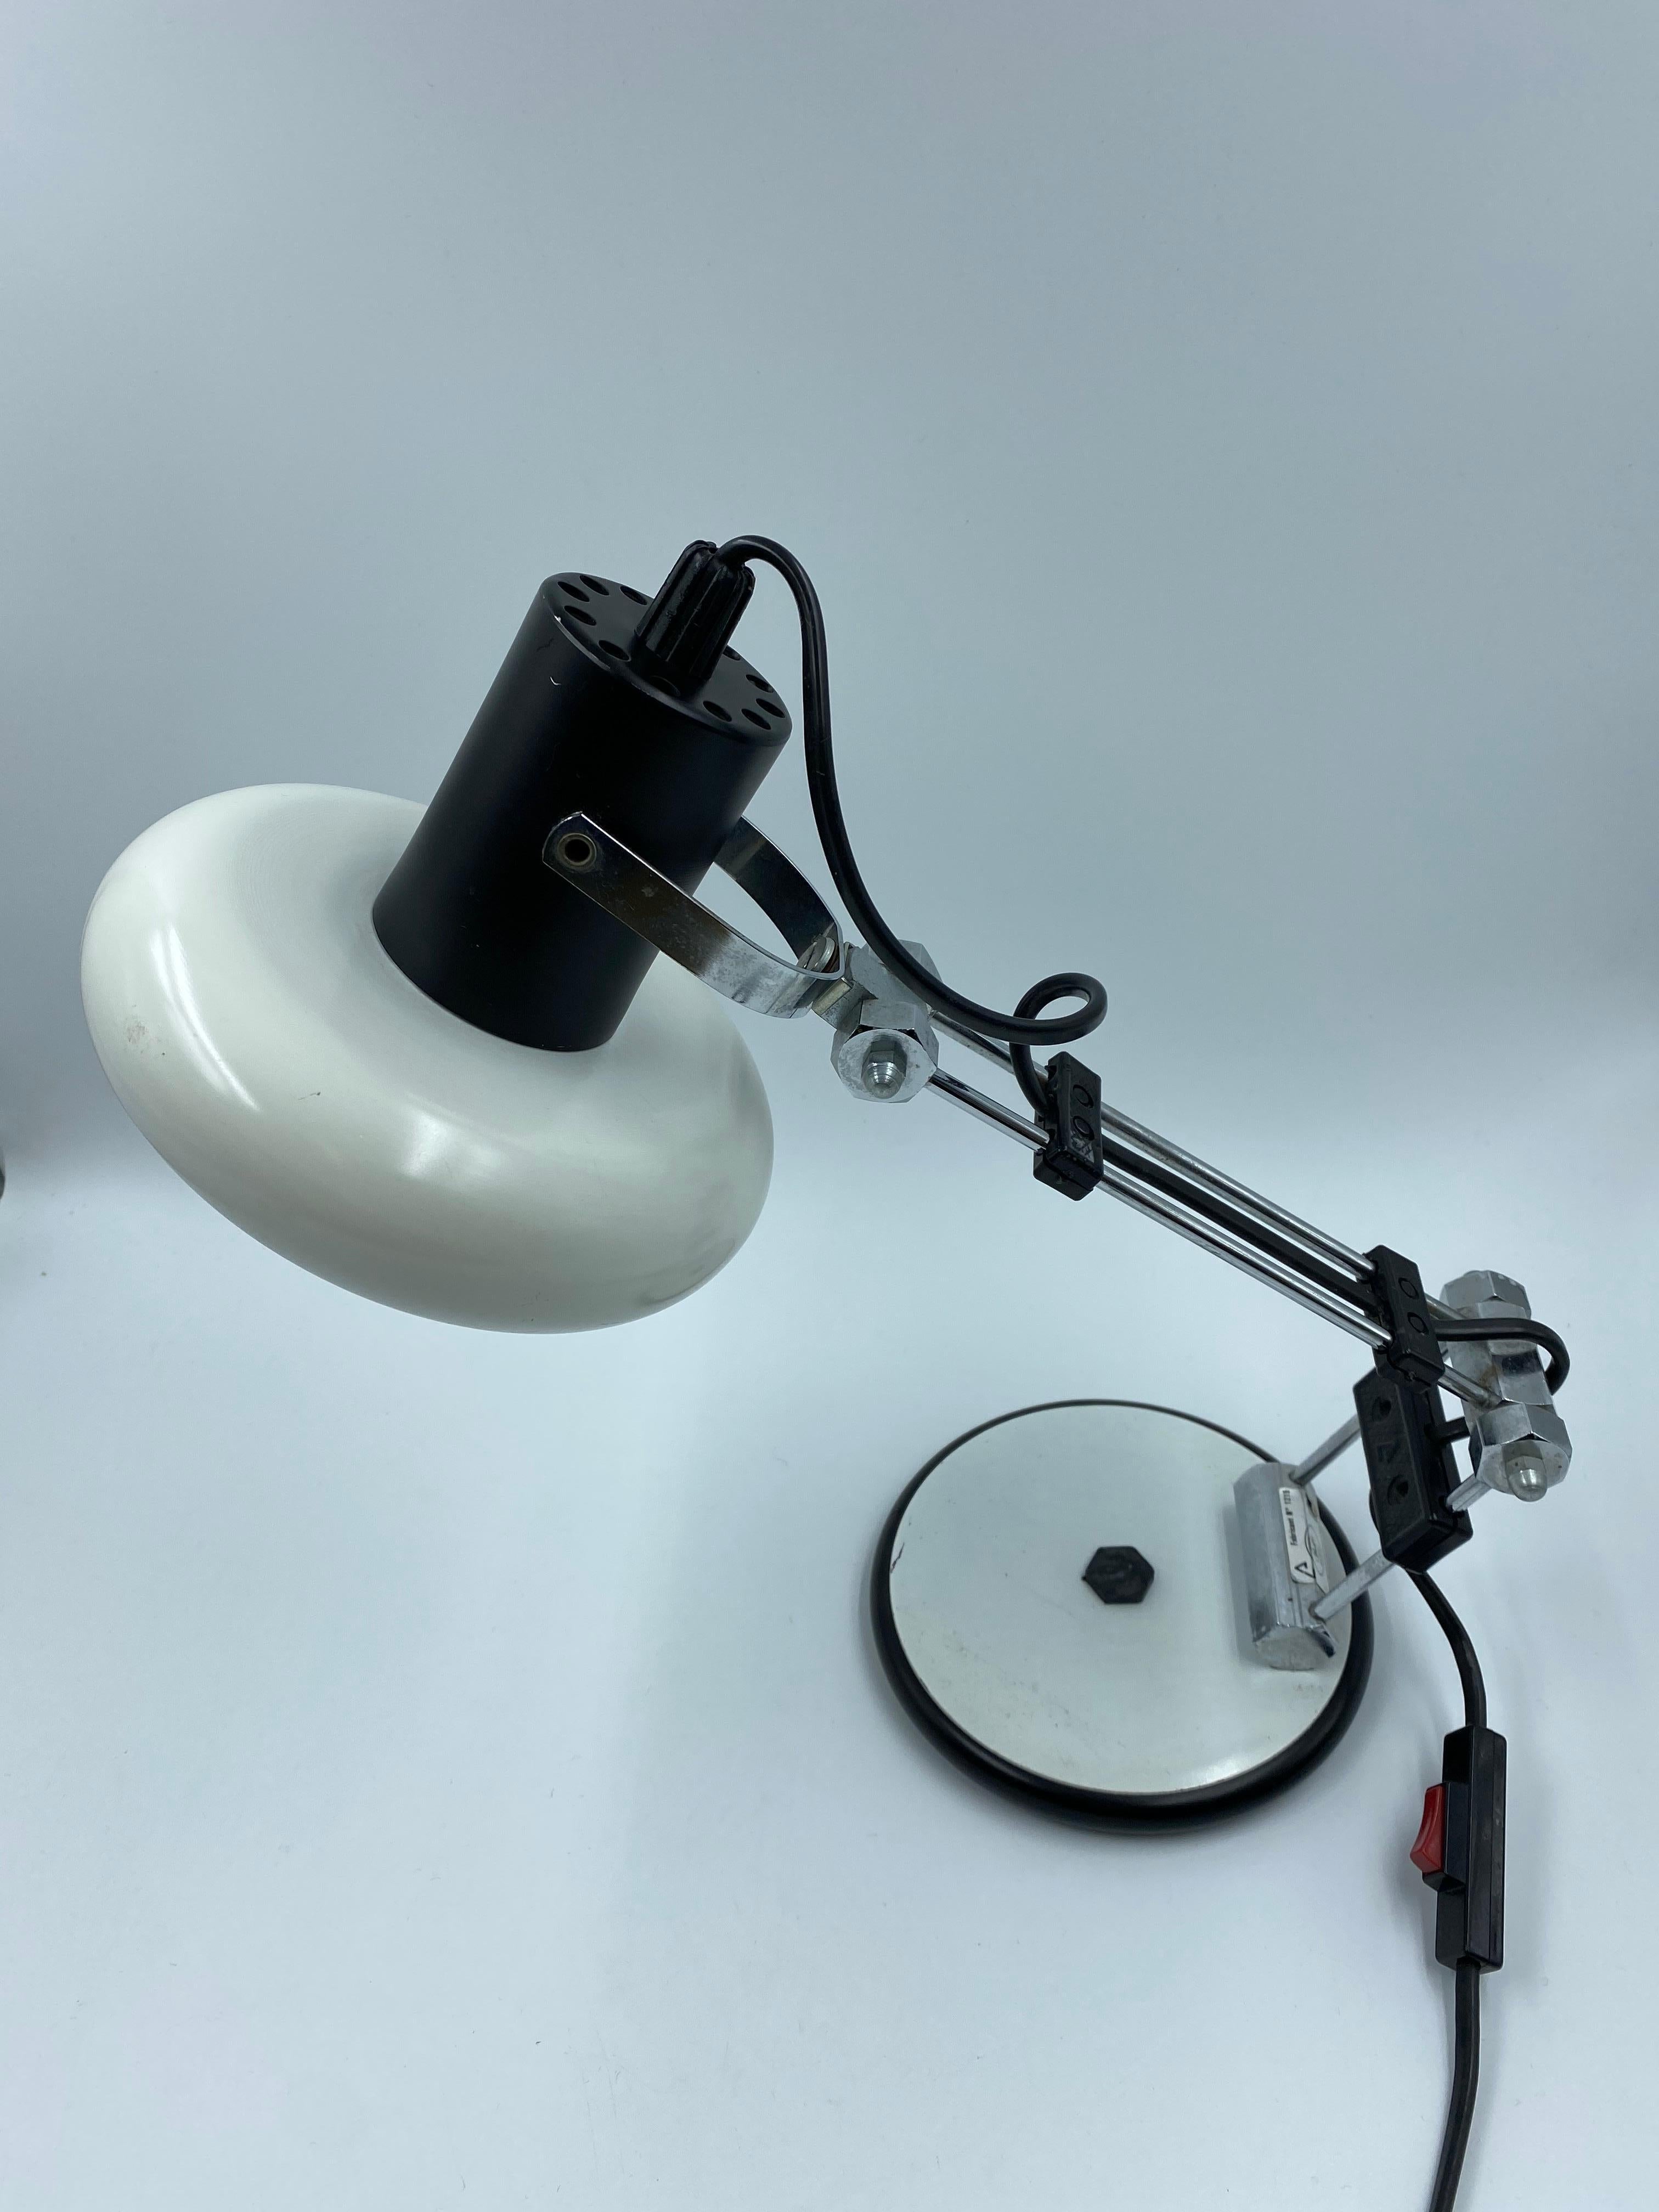 Industrial desk lamp from Luminaires NF from France. White with chrome guide rods on a heavy cast iron base. French design from the 1970s in good vintage condition. The lampshade is rotatable and can be adjusted in all positions by means of the